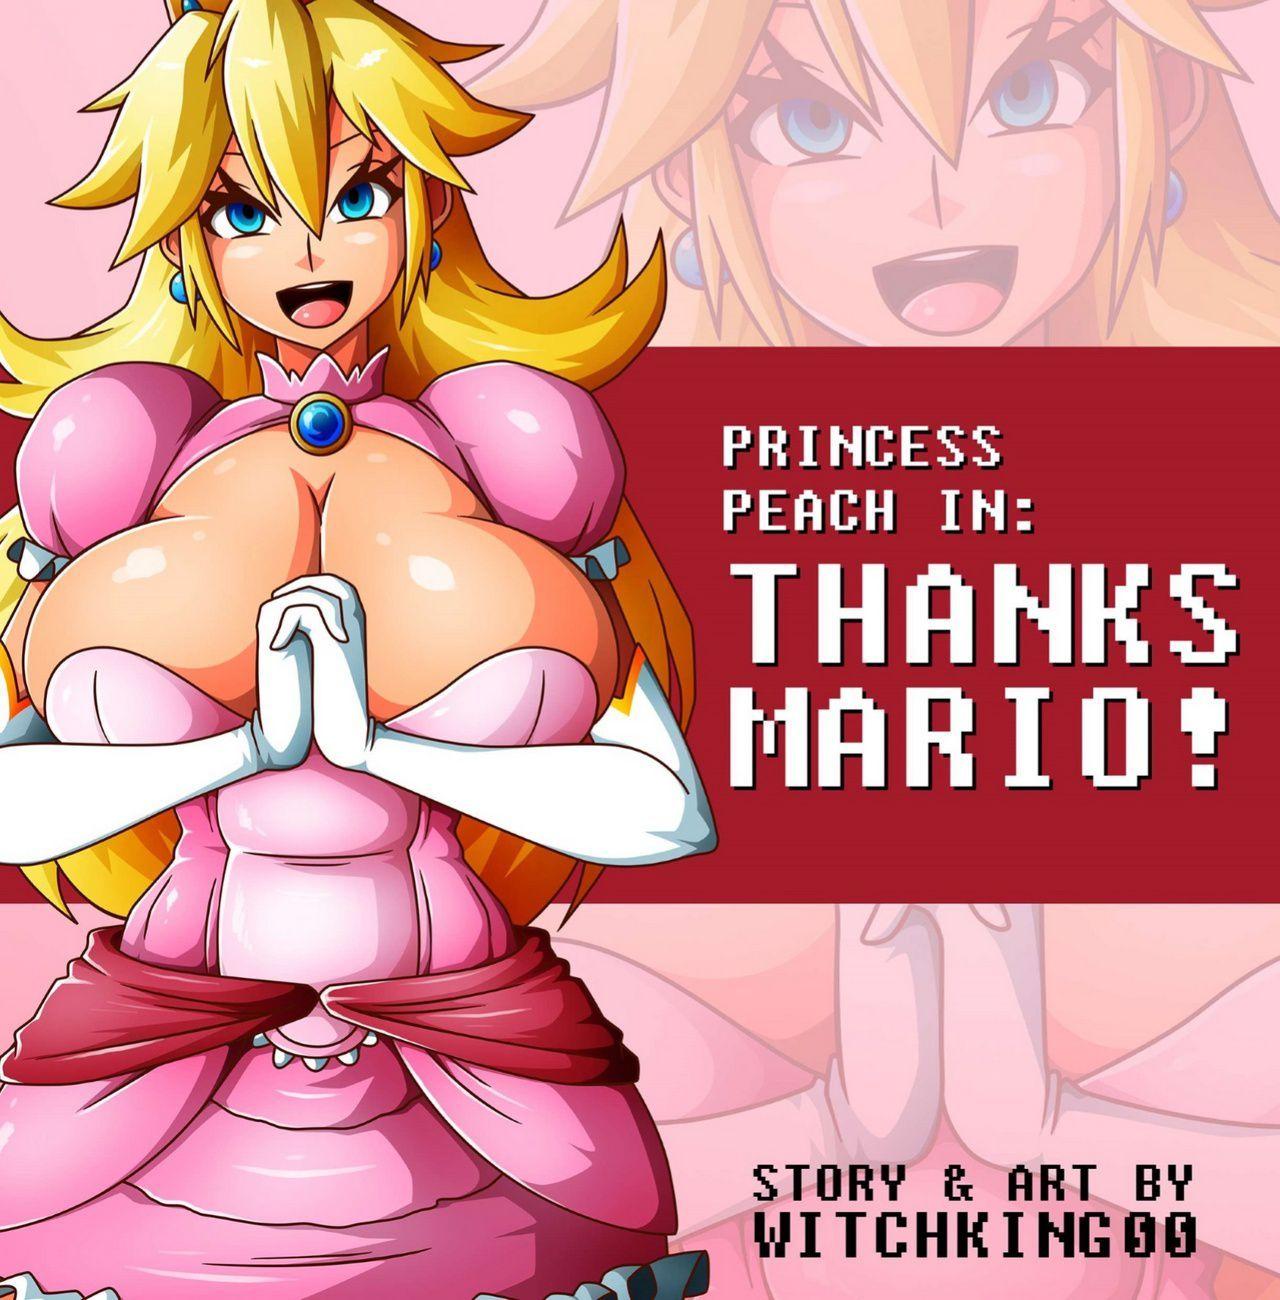 Bunny recommendet Princess peach threesome.